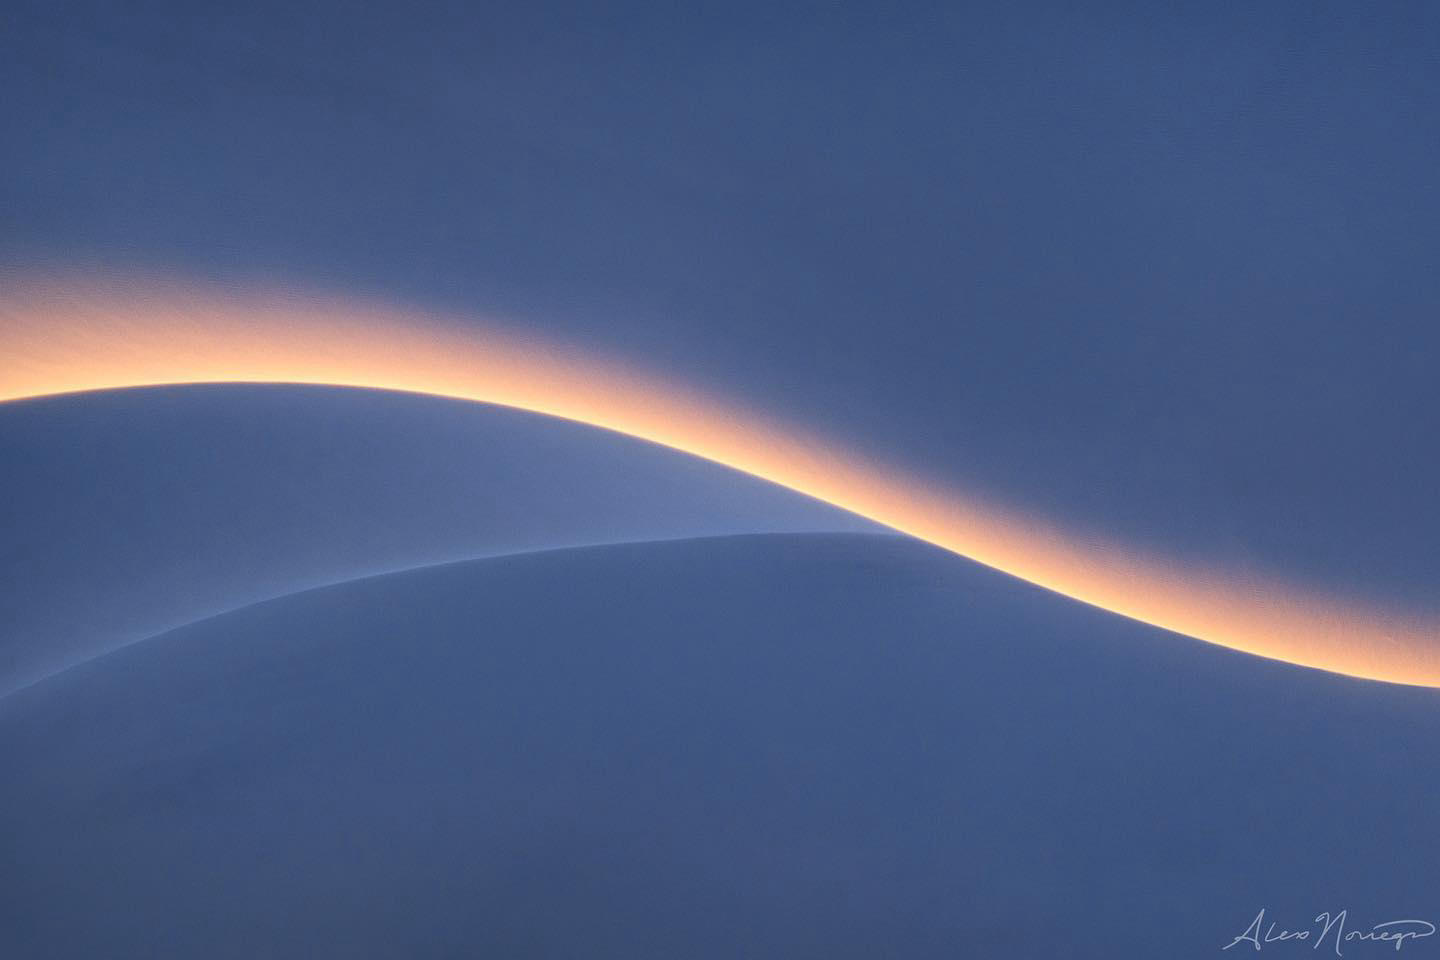 image  1 Alex Noriega - Copperline (2022)I guess I should have given up on dunes and Death Valley when they w